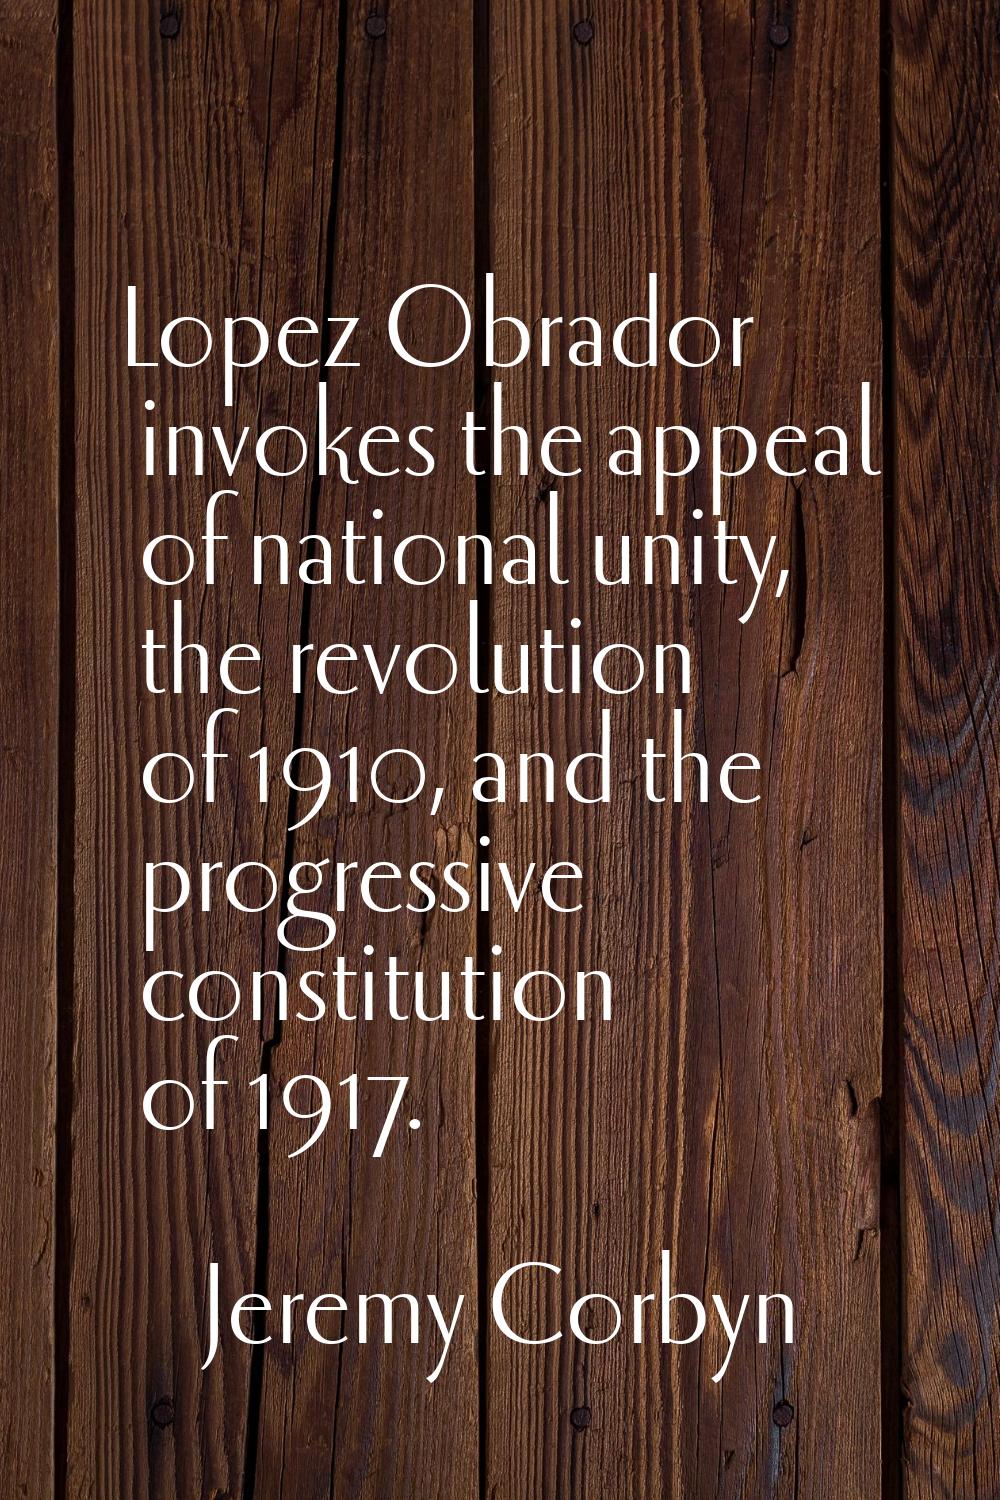 Lopez Obrador invokes the appeal of national unity, the revolution of 1910, and the progressive con